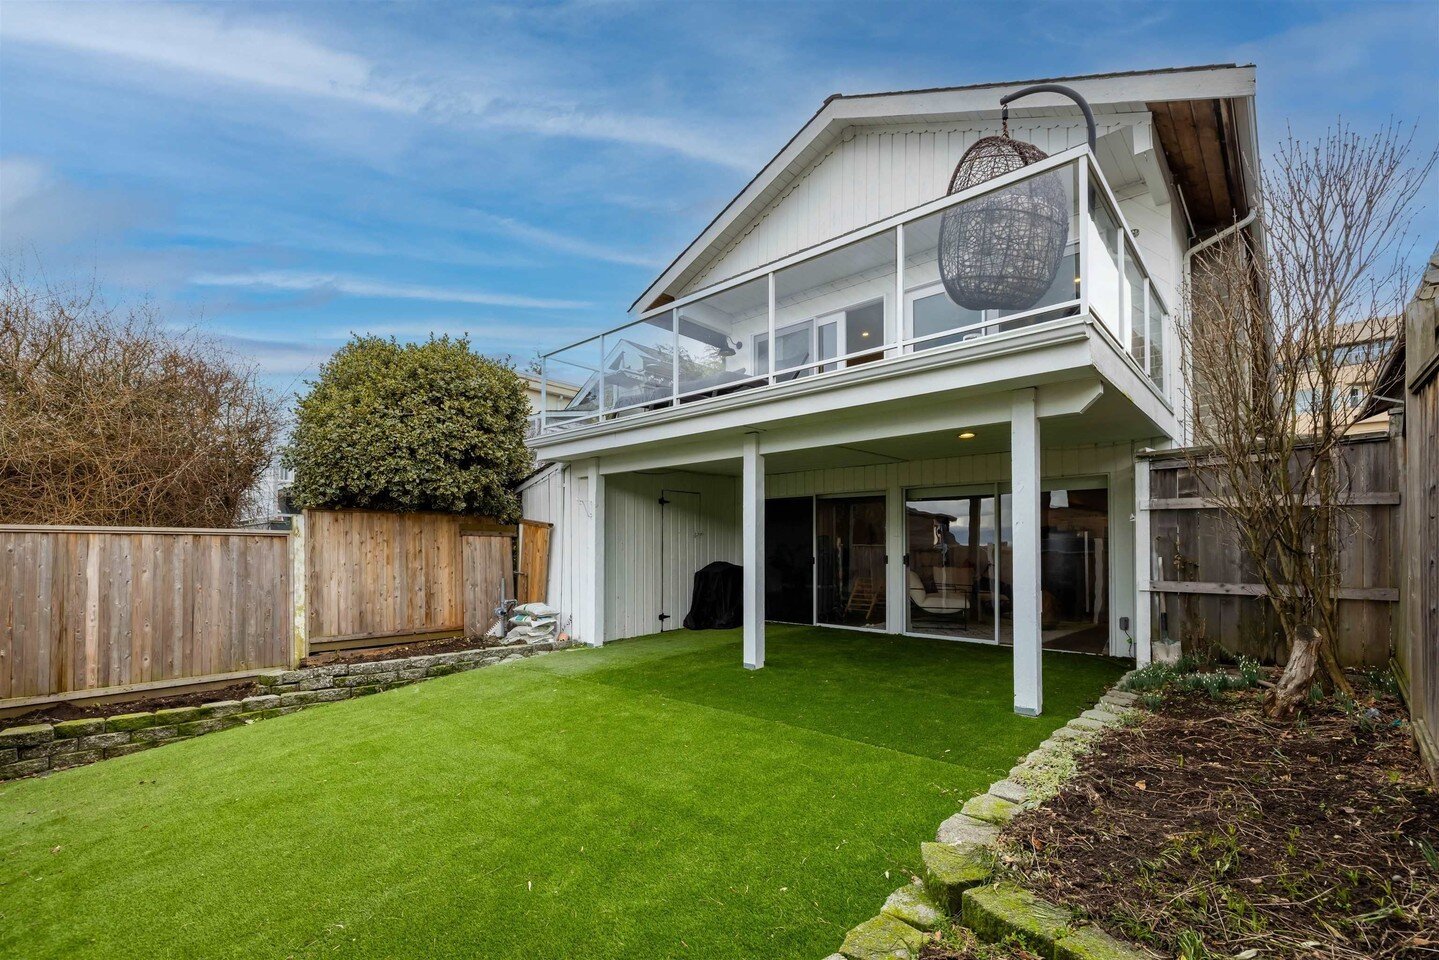 15170 BEACHVIEW Avenue, White Rock: $1,599,000 For more information on this property - click on the link in our bio and look up this address!  #Oceanview #Vancouver #westvancouver #whiterock #luxuryhomesvancouver #oceanviewhomes #VancouverRealEstate 